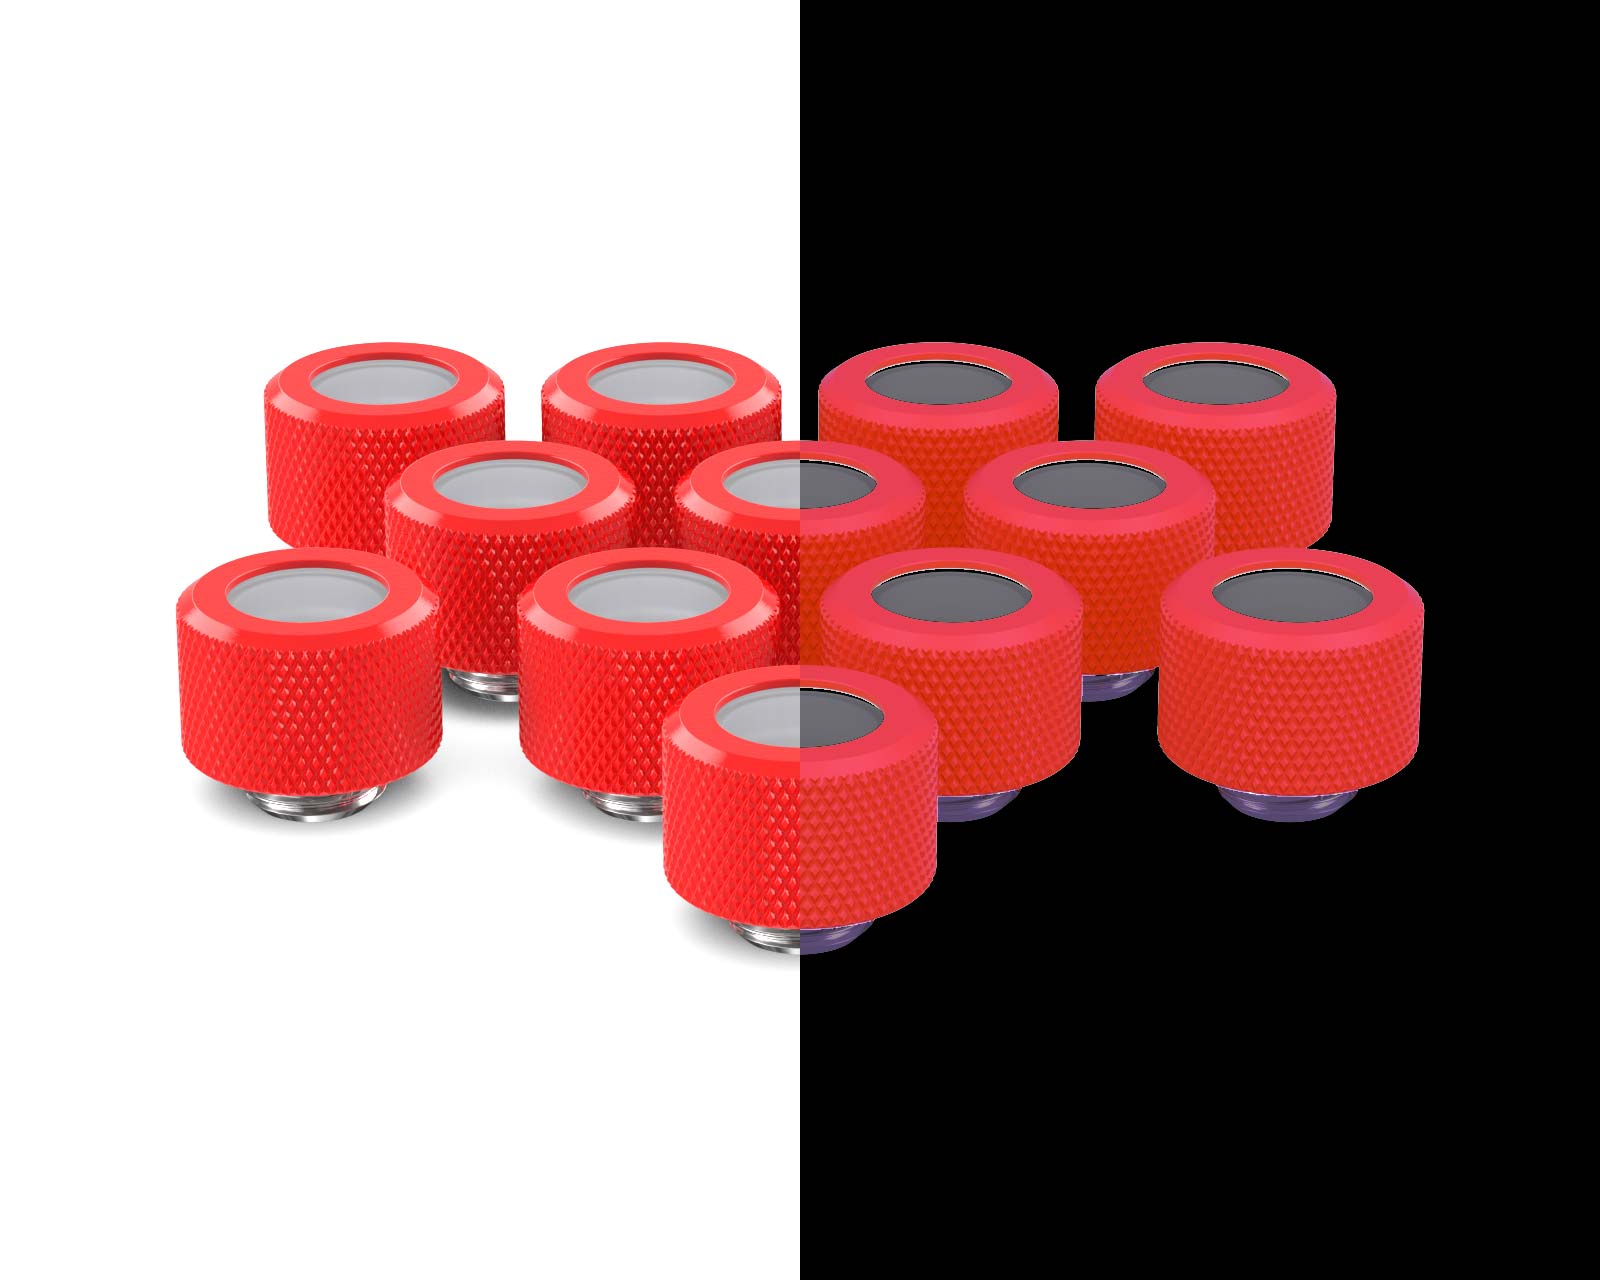 PrimoChill 14mm OD Rigid SX Fitting - 12 Pack - PrimoChill - KEEPING IT COOL UV Red